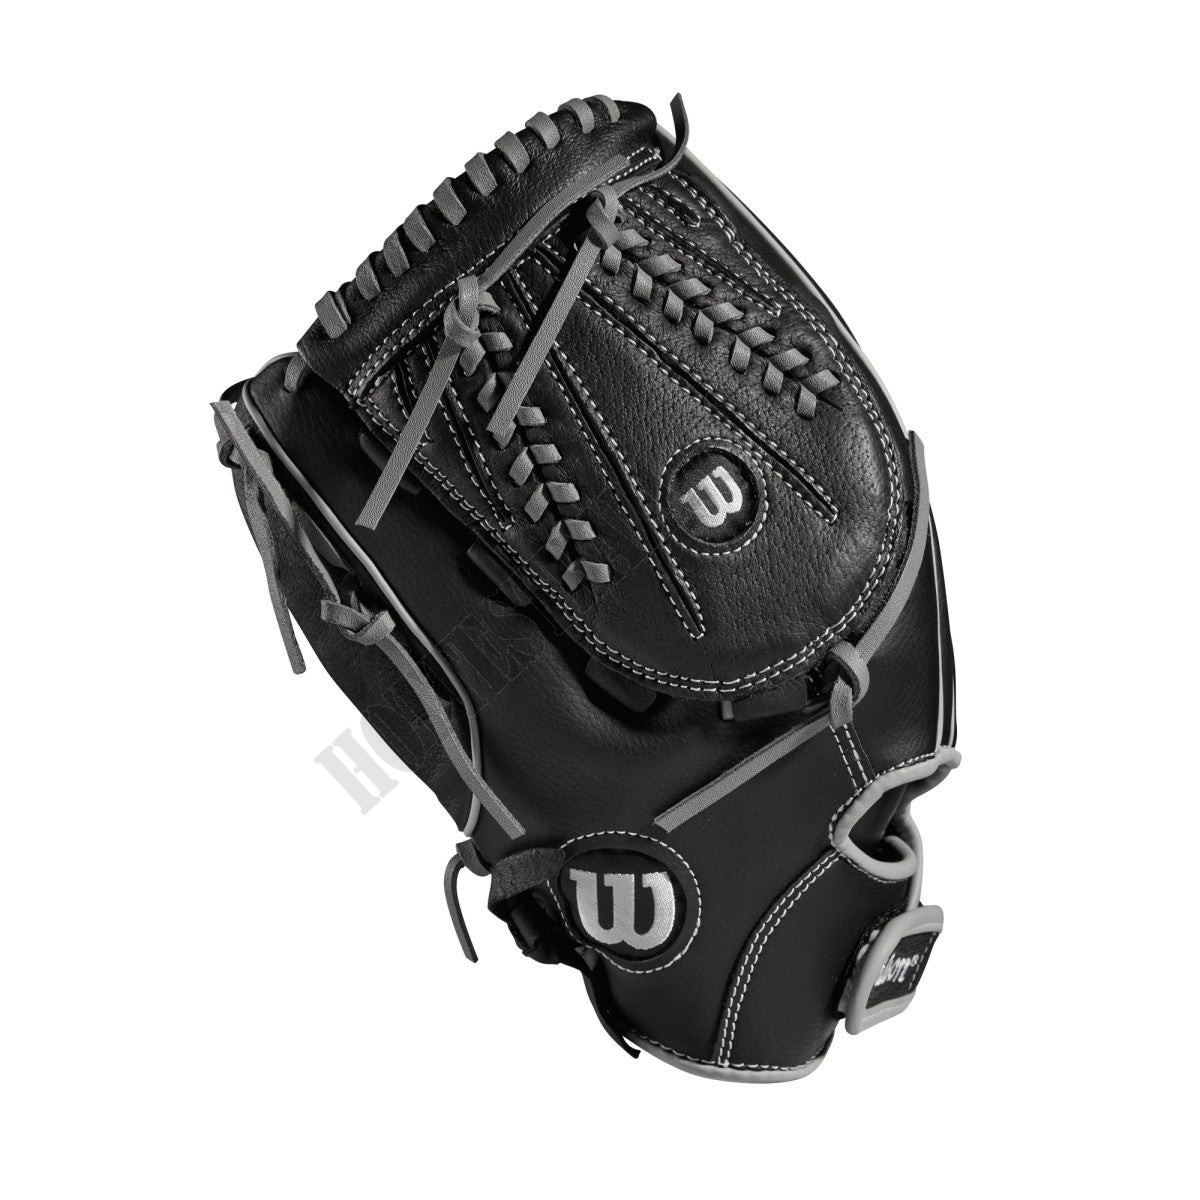 A360 13" Slowpitch Glove - Left Hand Throw ● Wilson Promotions - -5